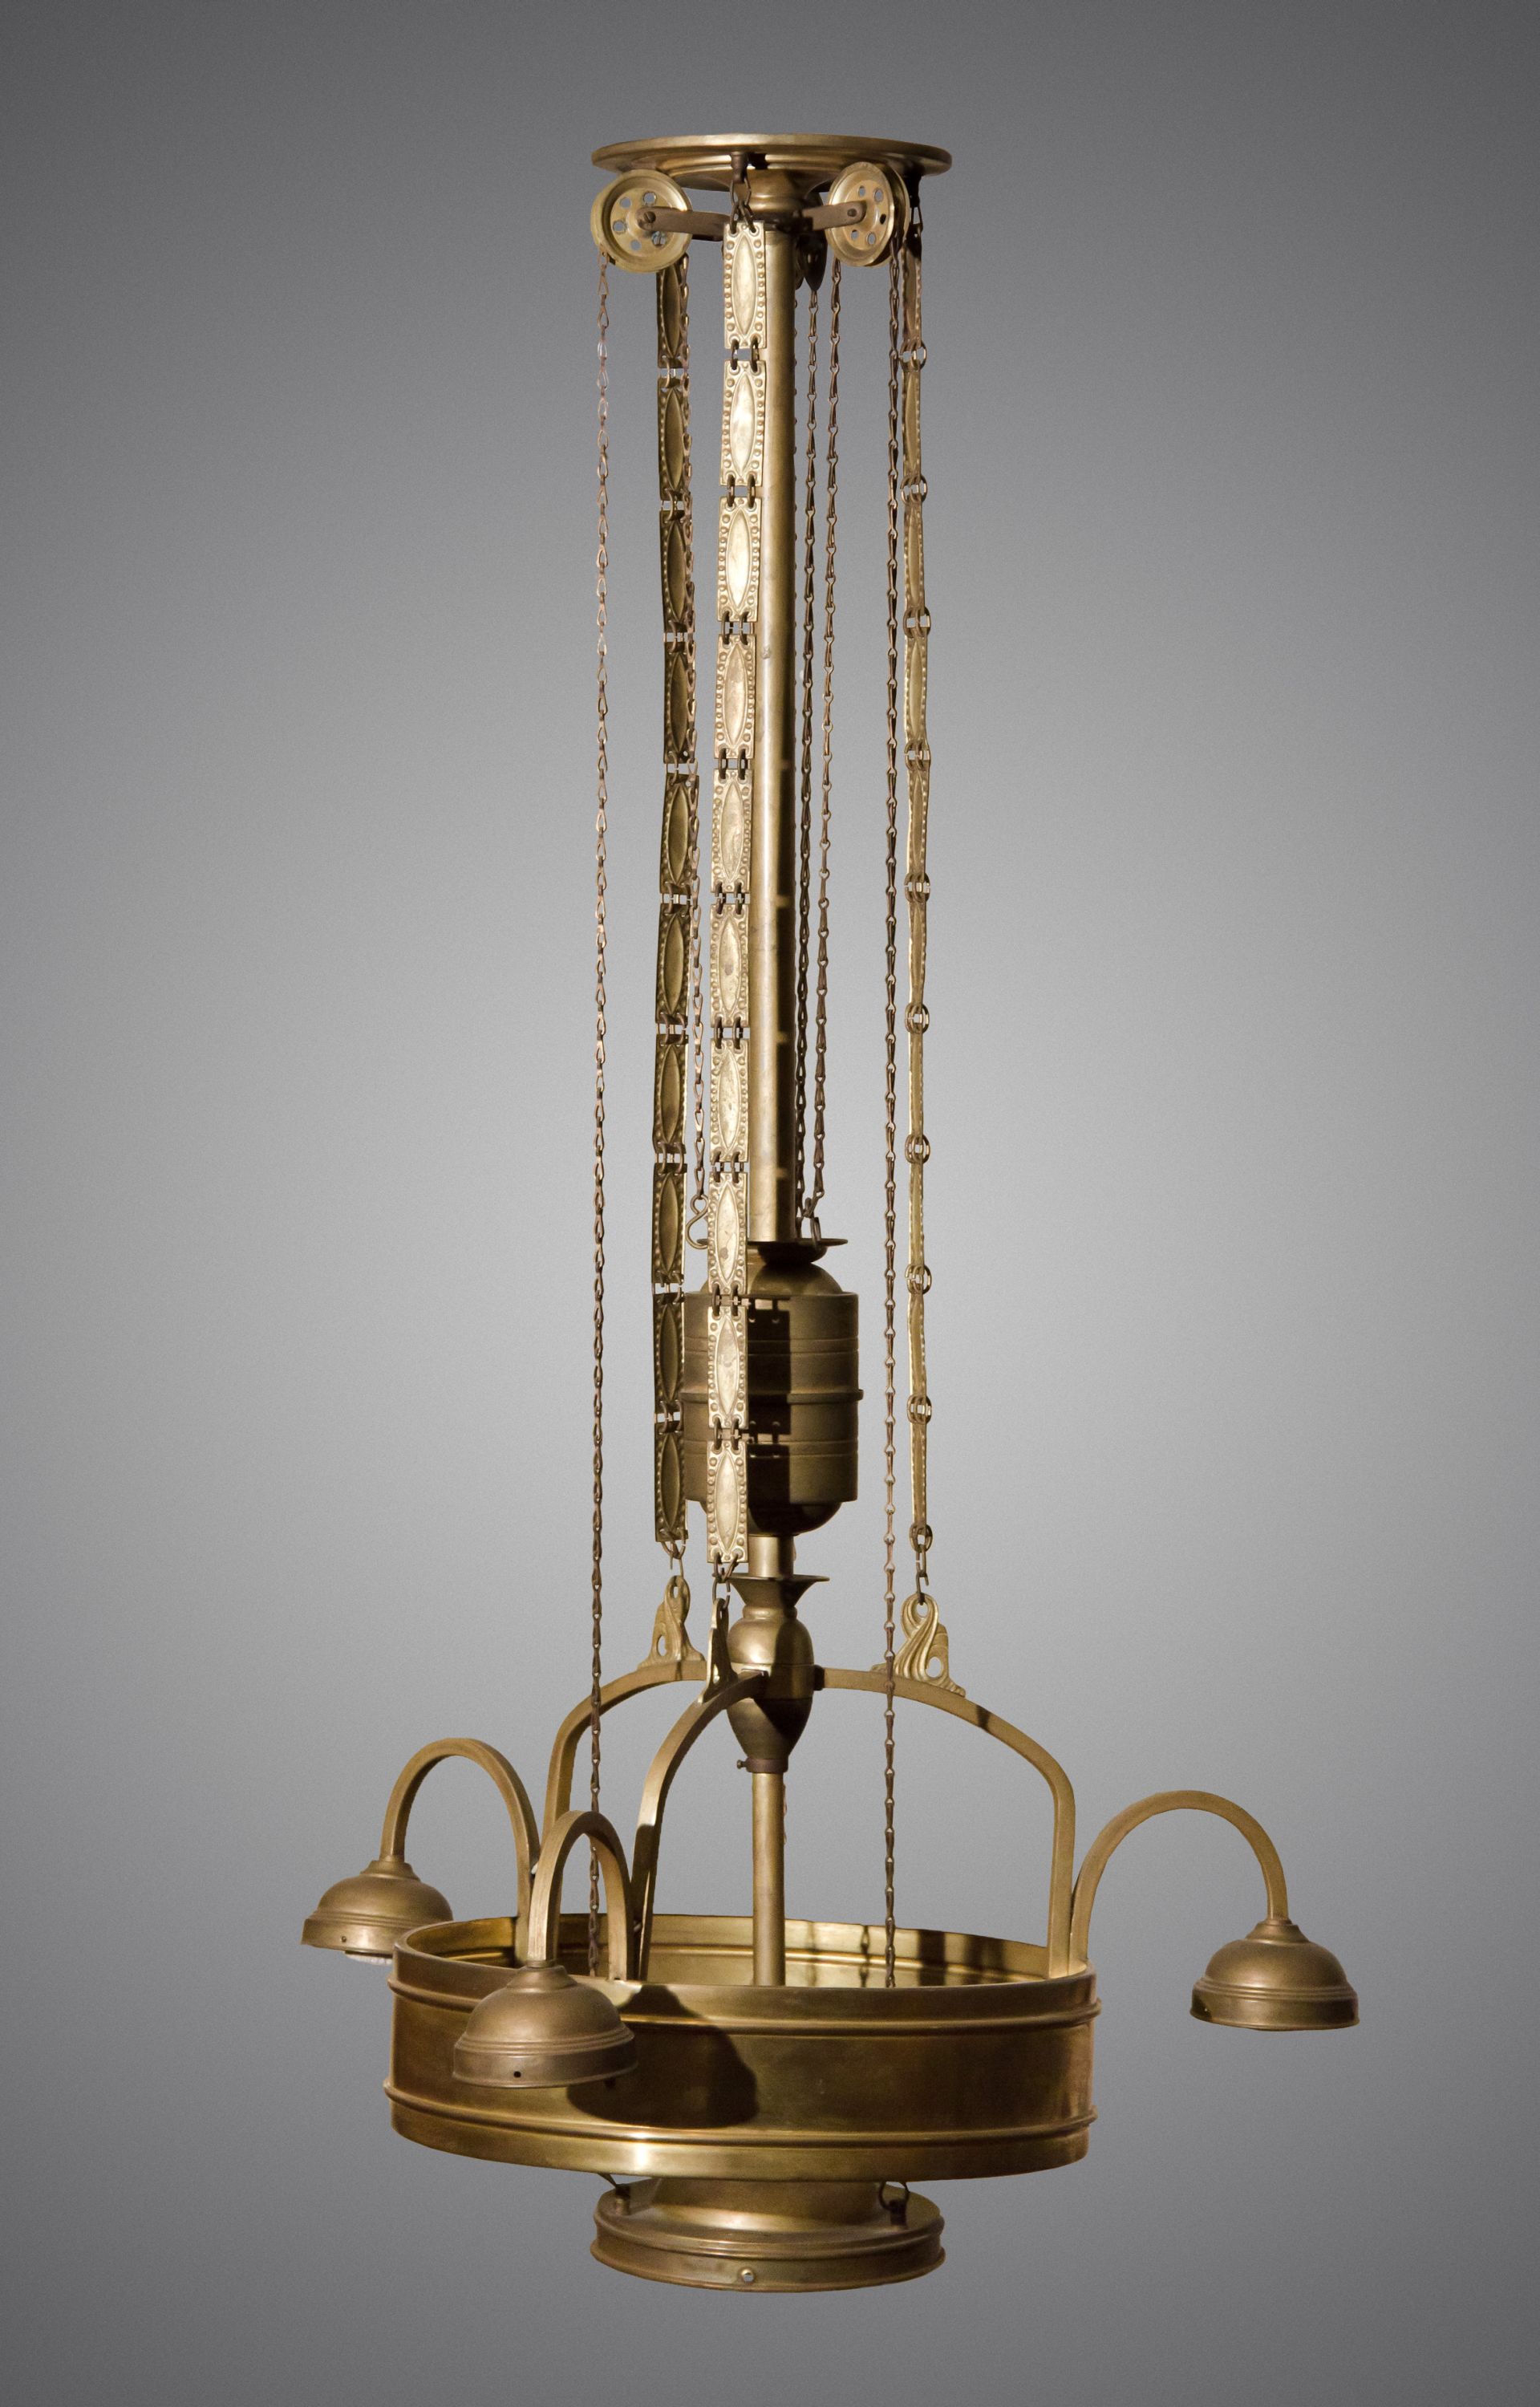 Chandelier, 1900-1911, Lithuanian National Museum of Art, MPM-2316. Photo by Tomas Kapočius, 2013